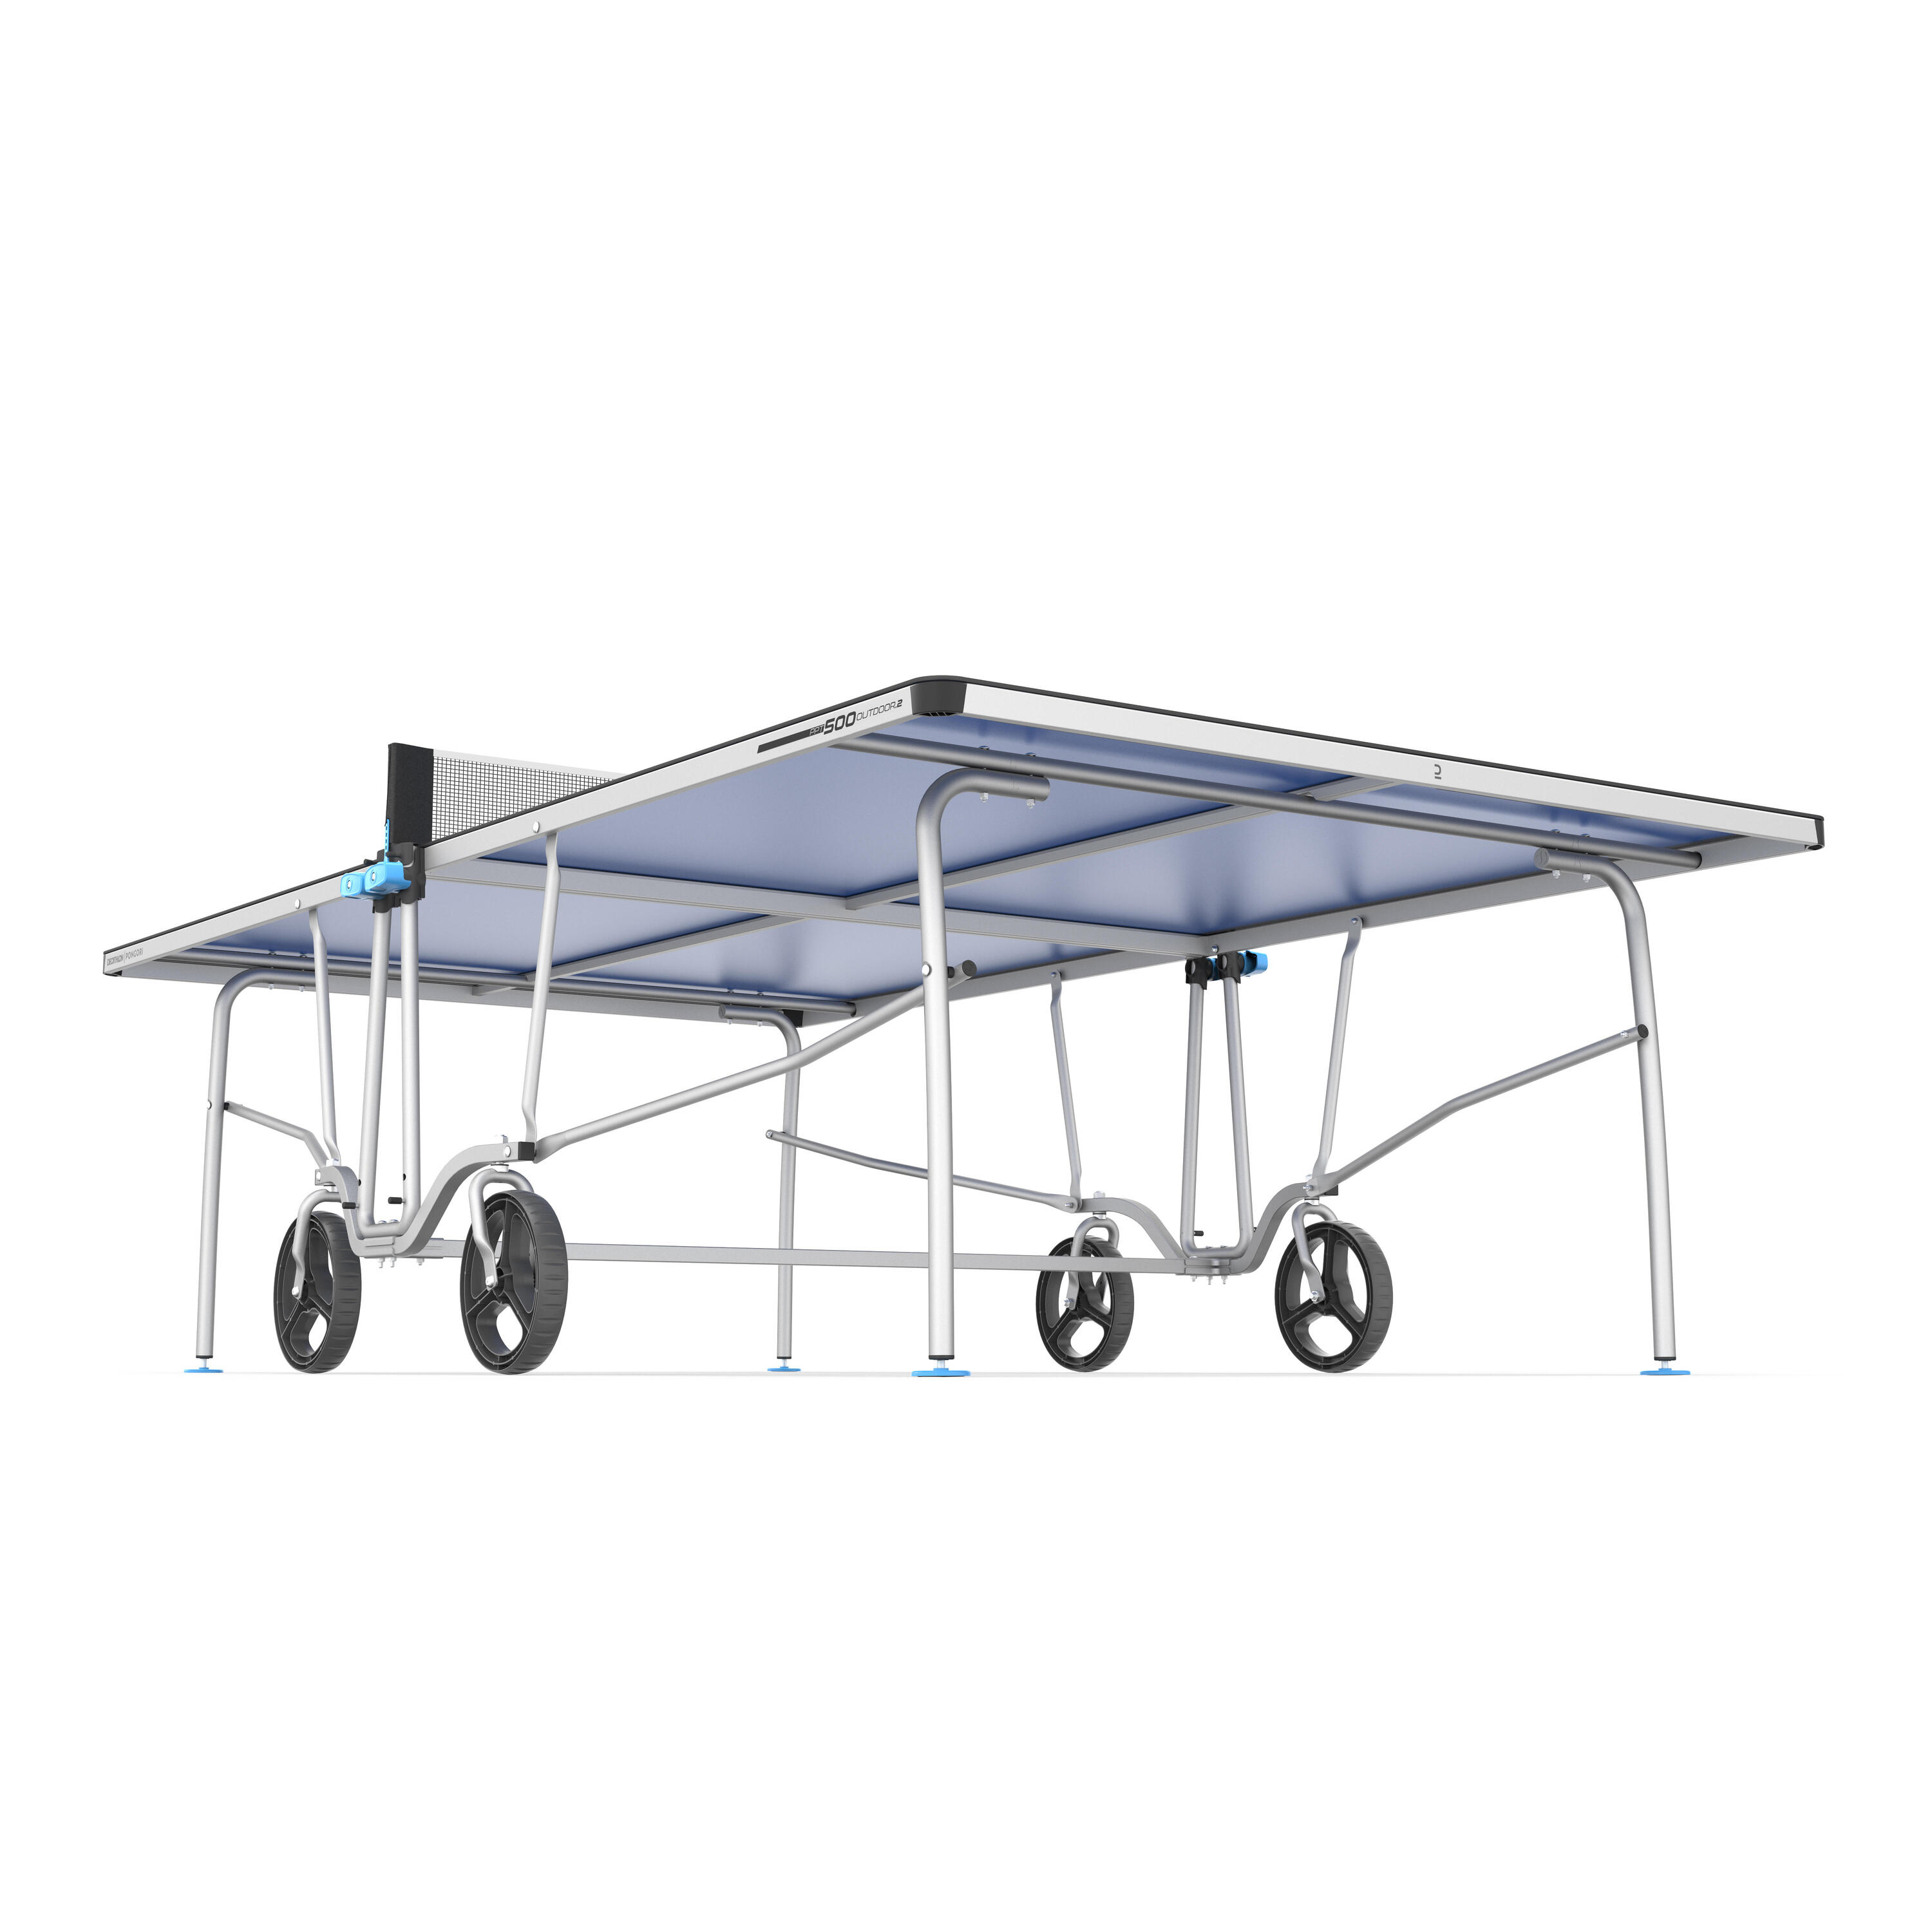 Outdoor Table Tennis Table PPT 500.2 - Blue 6/14